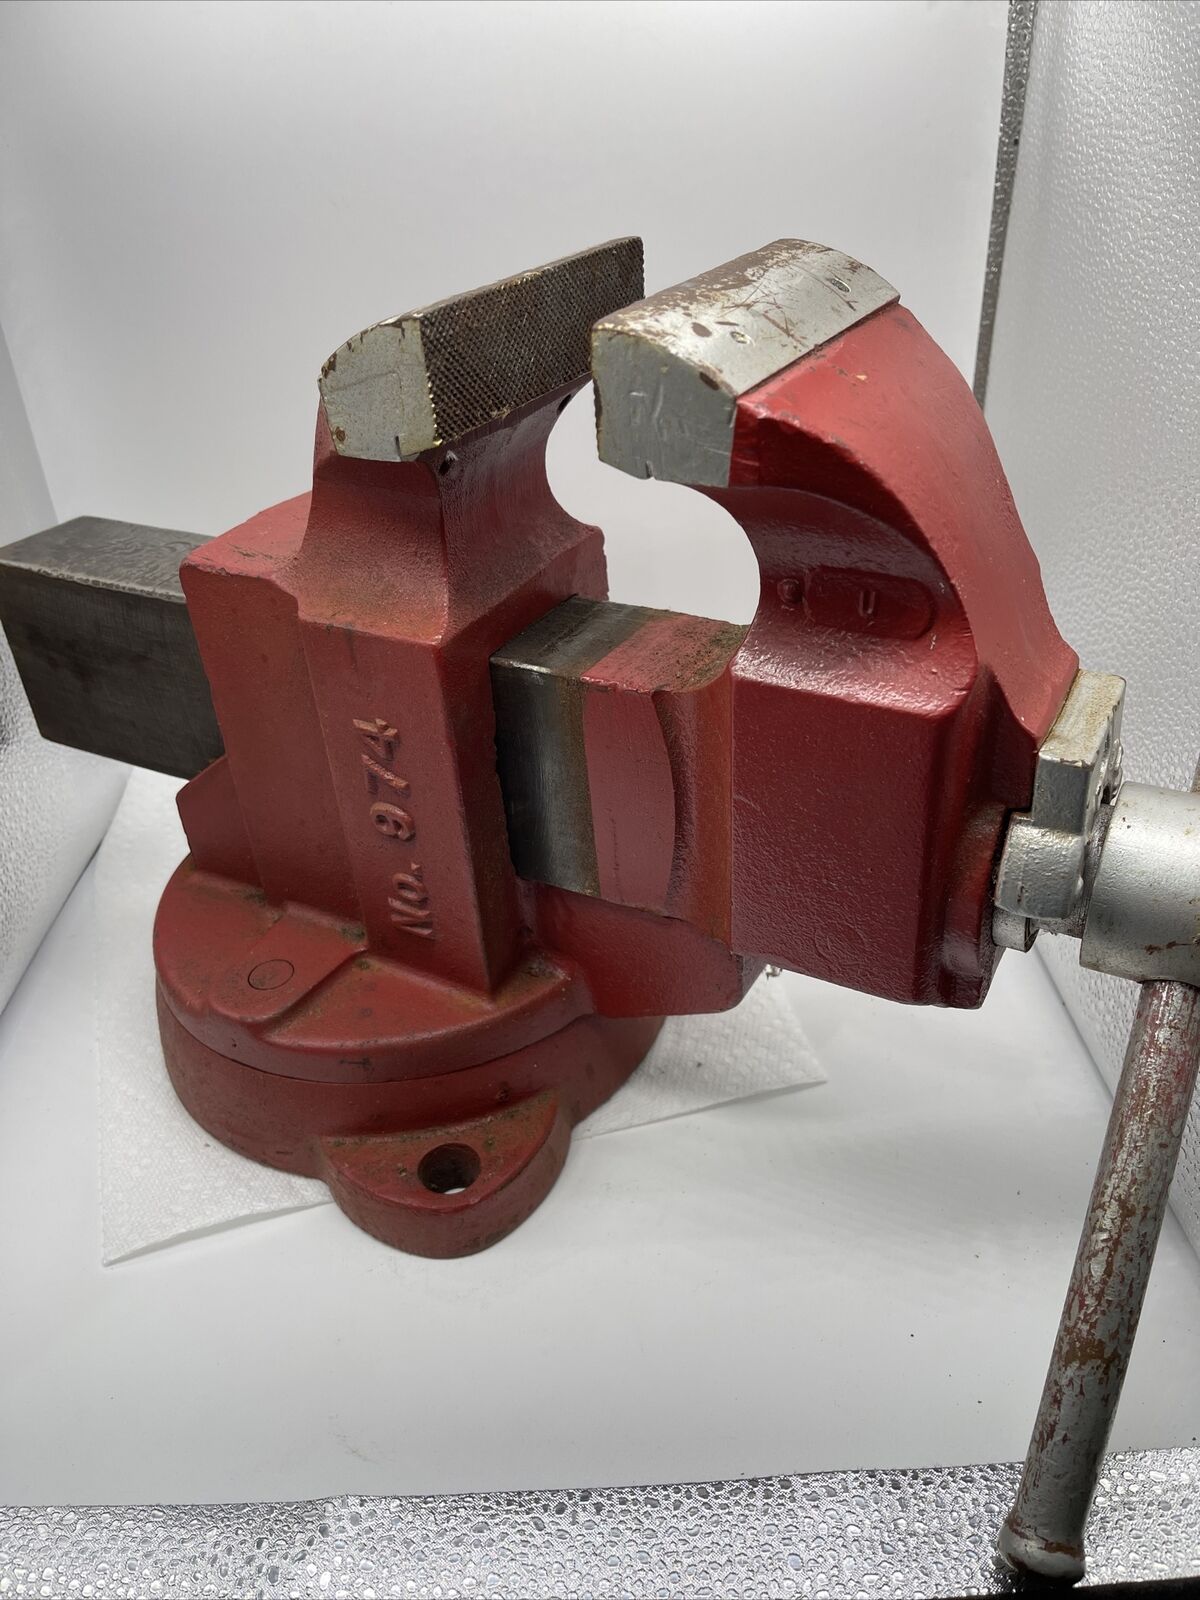 Chas. Parker No. 974 Bench Vise 4” Jaws 63Lbs- Take a LOOK- Good Condition